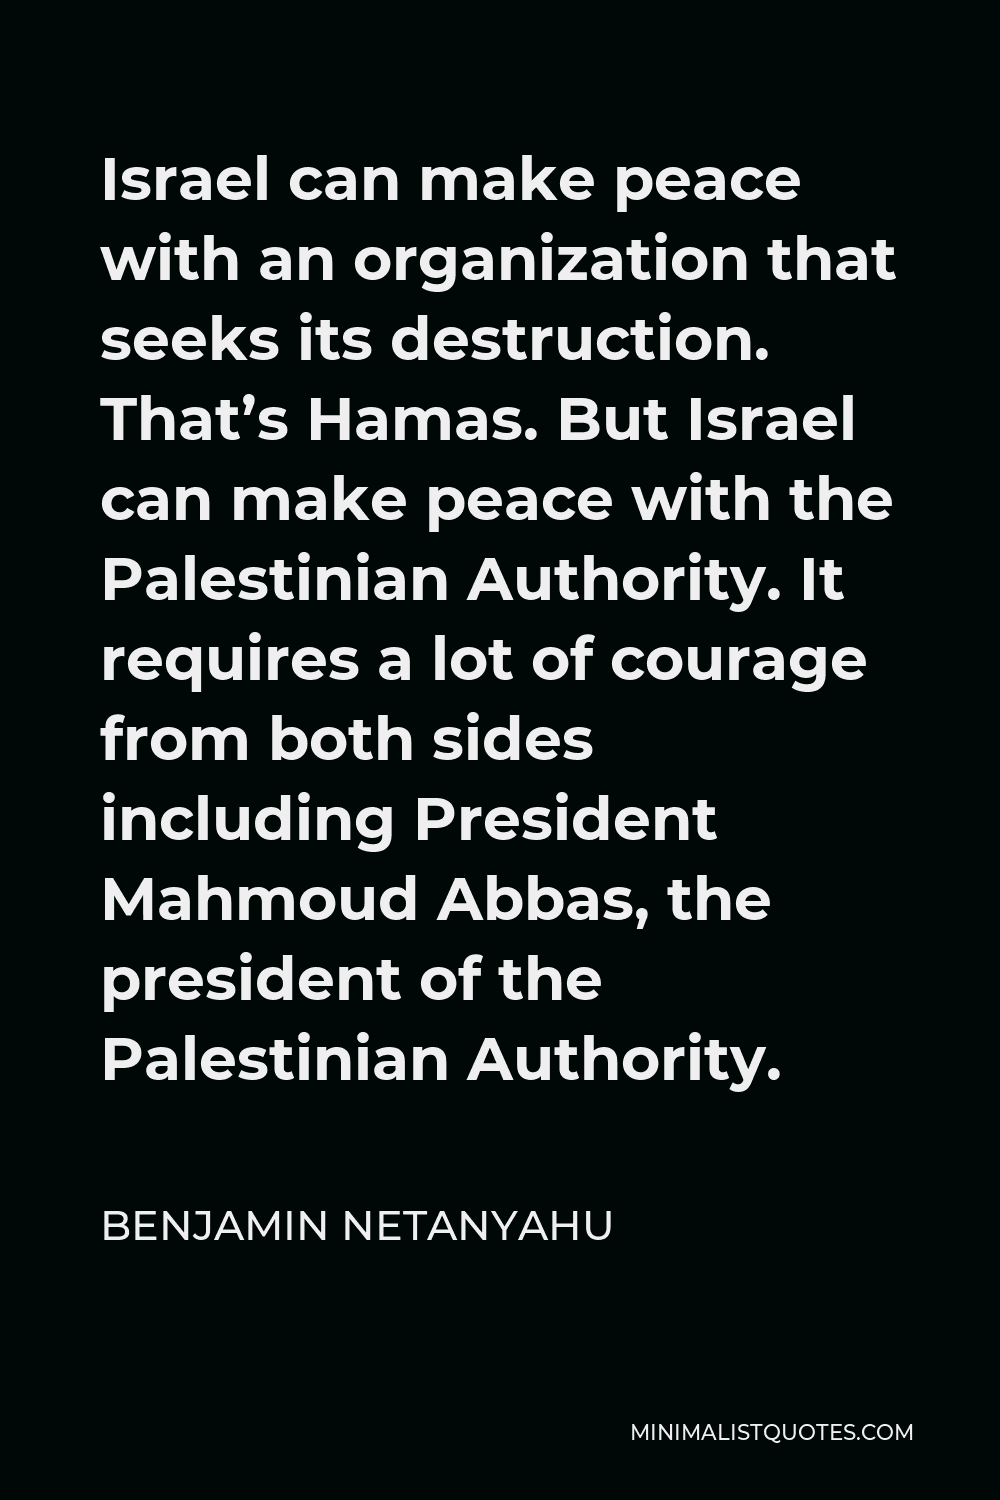 Benjamin Netanyahu Quote - Israel can make peace with an organization that seeks its destruction. That’s Hamas. But Israel can make peace with the Palestinian Authority. It requires a lot of courage from both sides including President Mahmoud Abbas, the president of the Palestinian Authority.